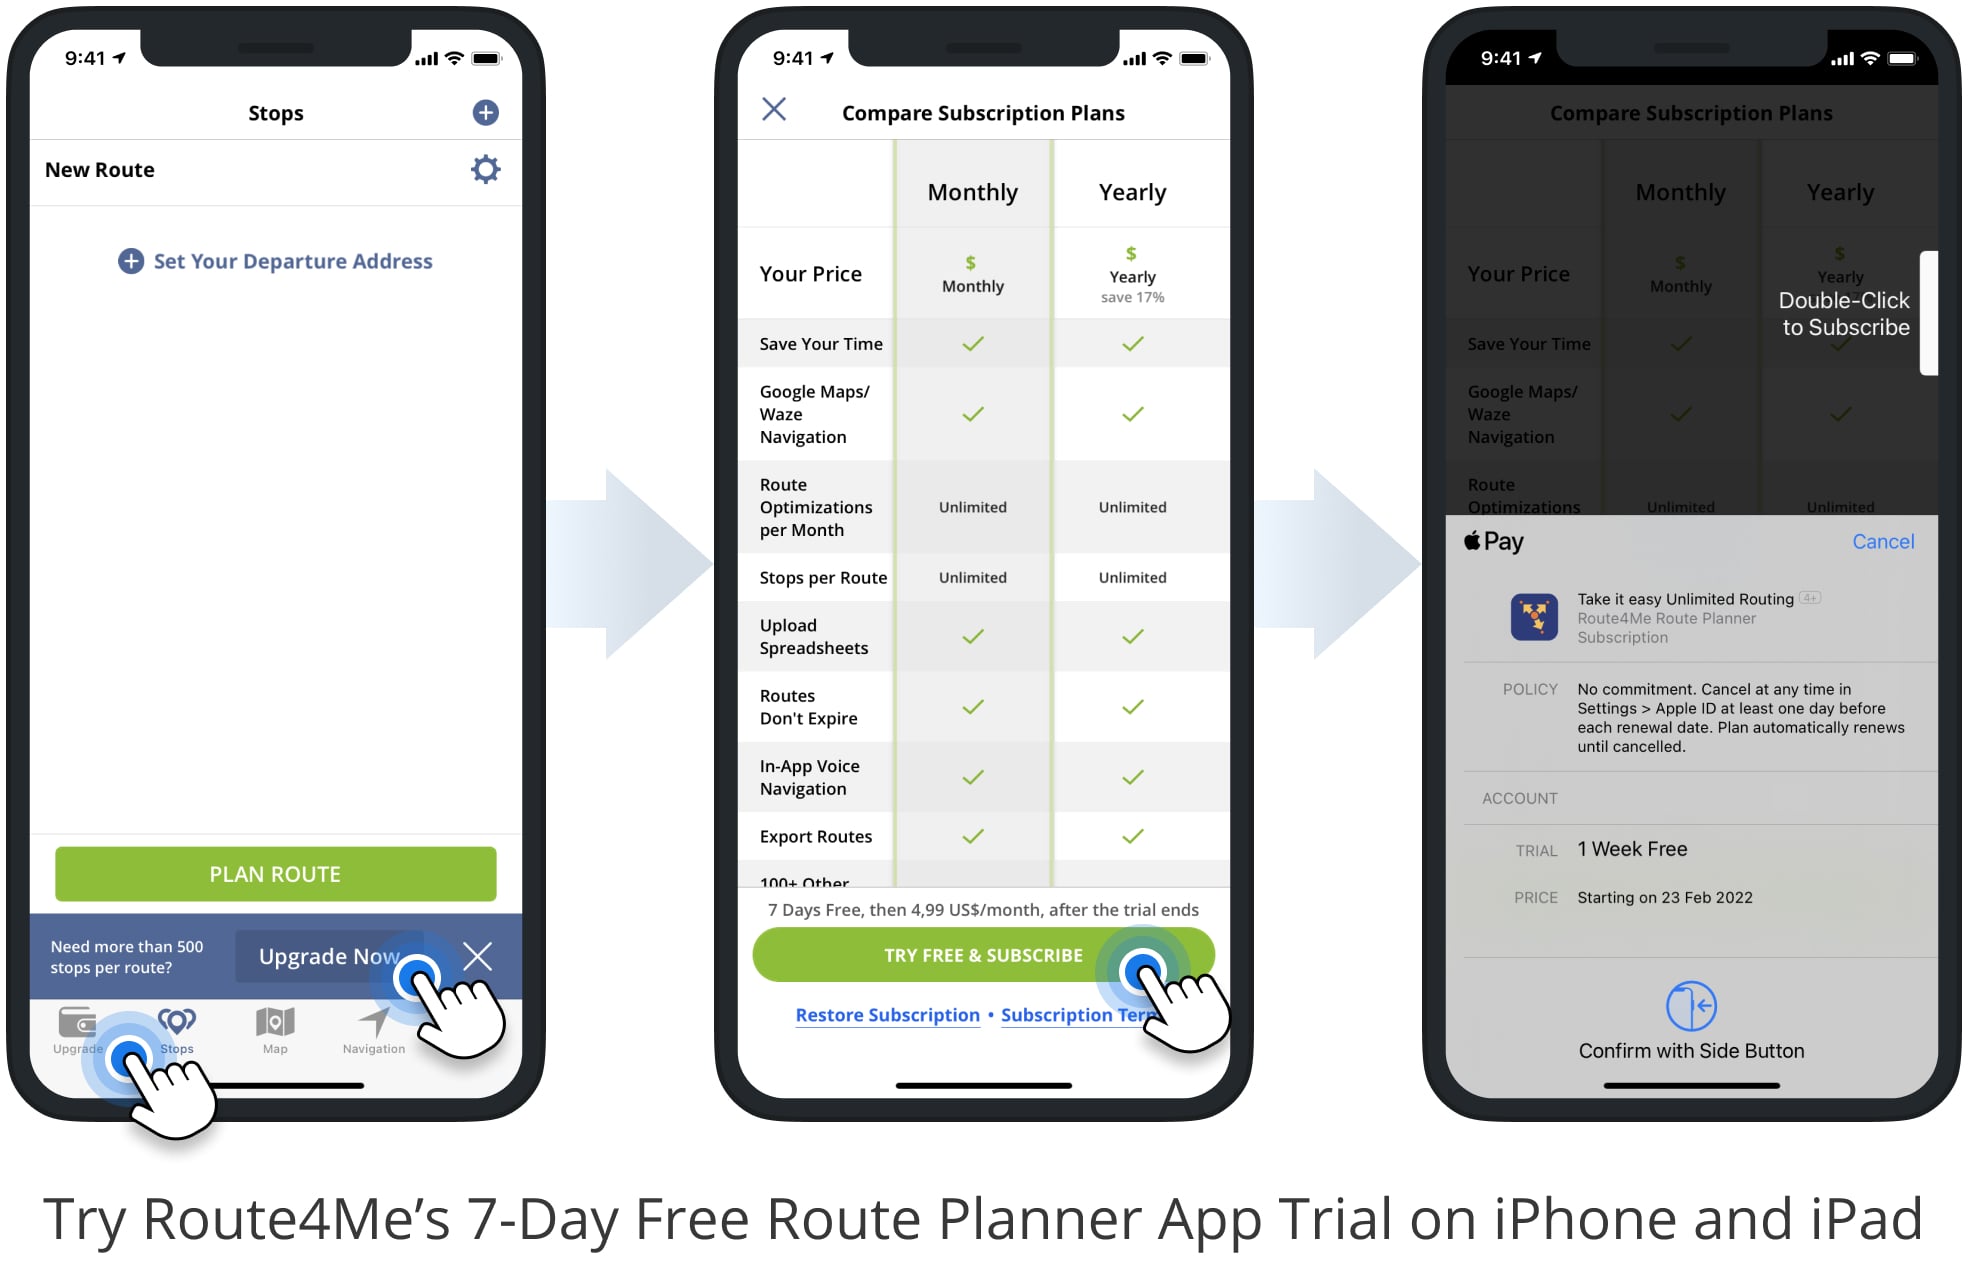 Subscribe and get a 7-day free route planner trial on Route4Me's iOS Route Planner app for iPhone and iPad.